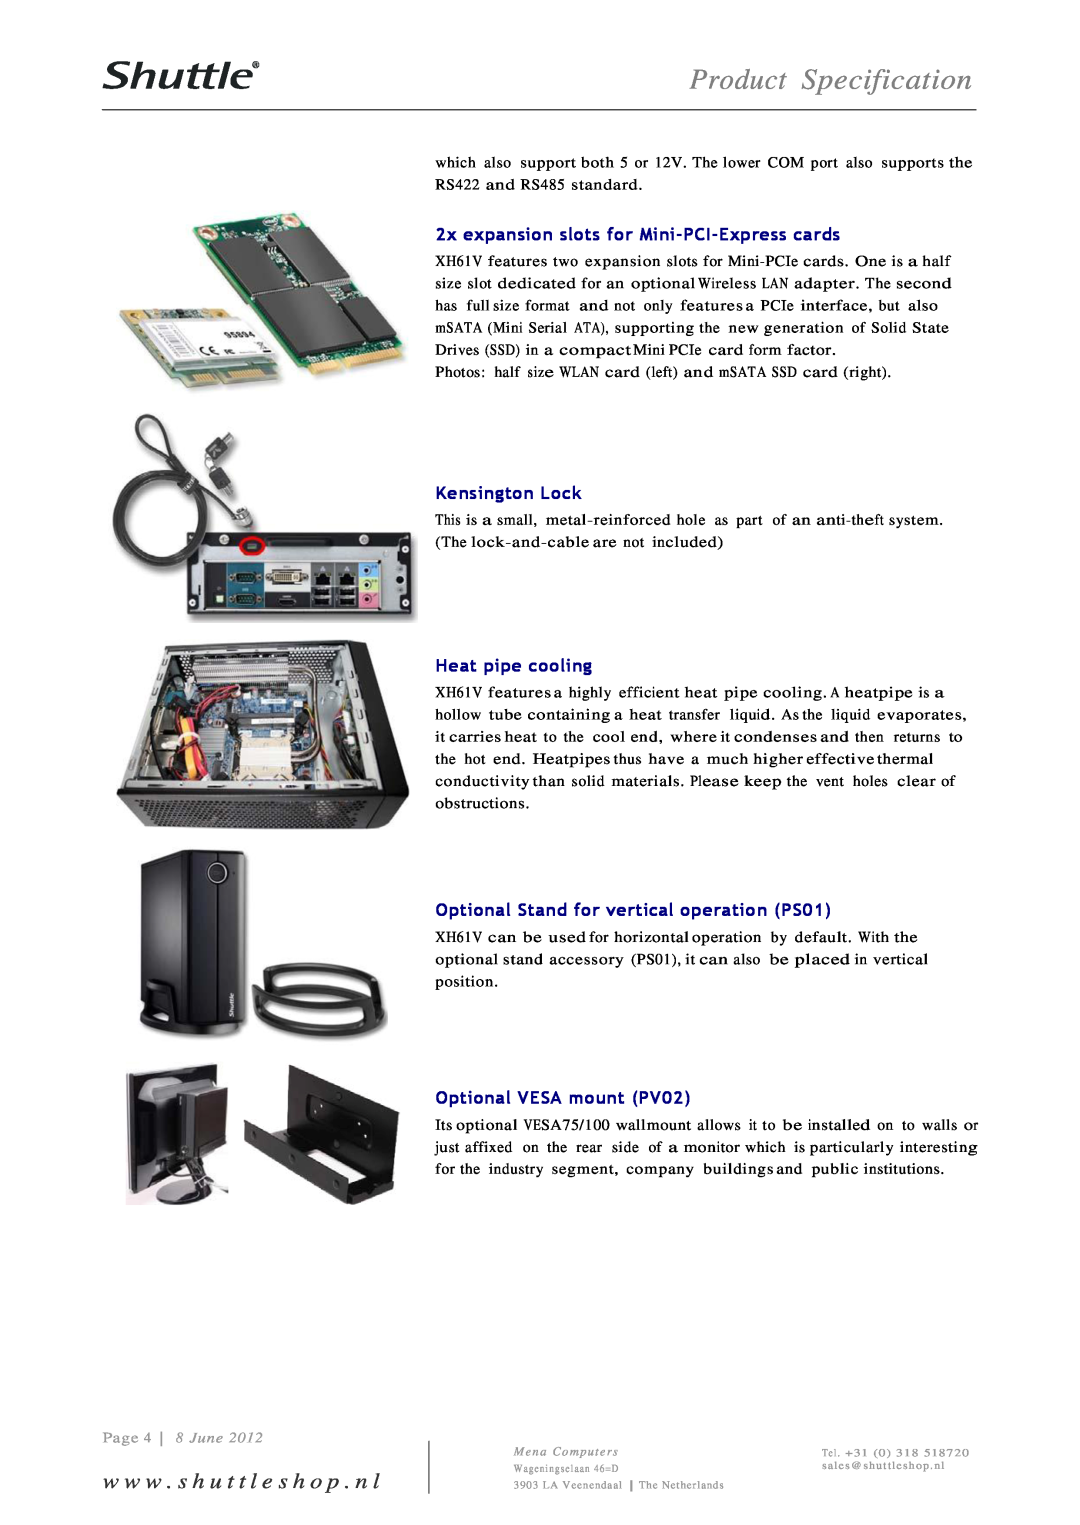 Shuttle Computer Group XH61V Product Specification, w w w . s h u t t l e s h o p . n l, Kensington Lock, Page 4 8 June 